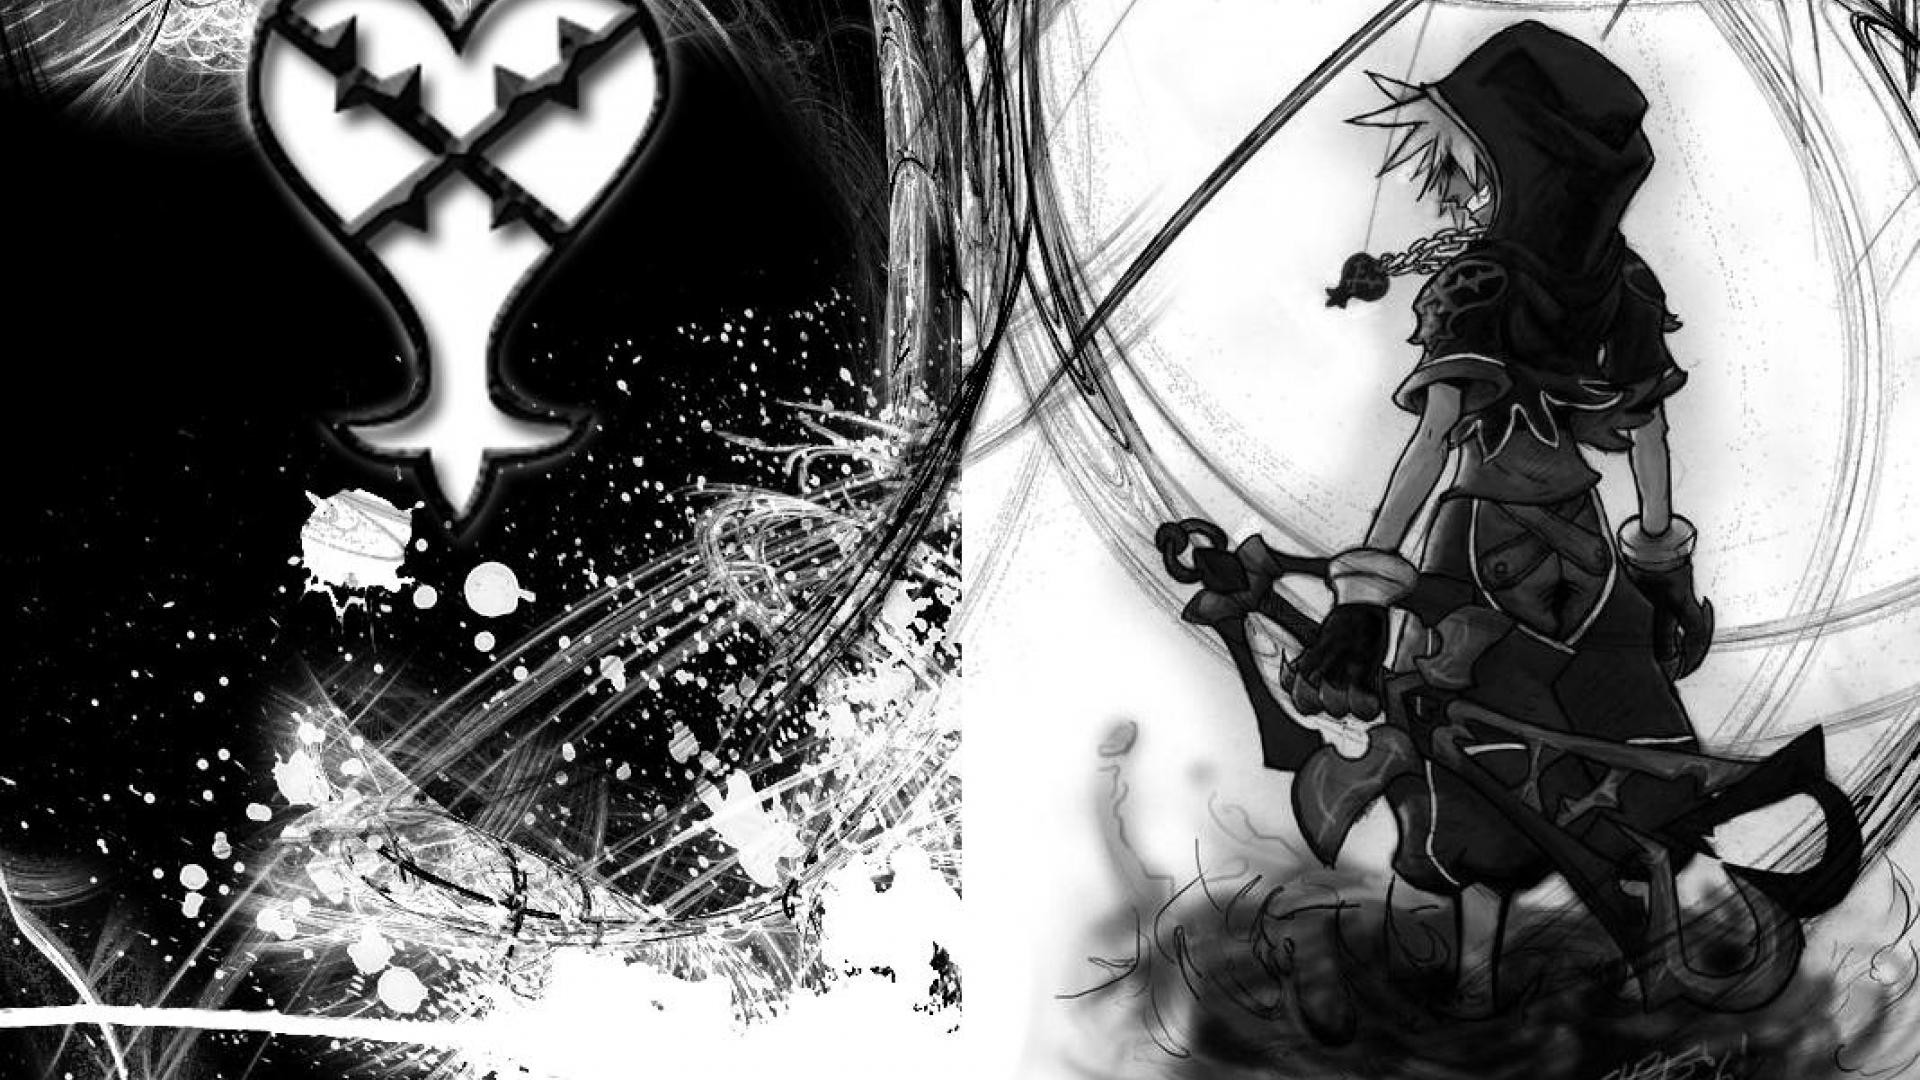 roxas wallpaper,fictional character,illustration,graphic design,monochrome,black and white